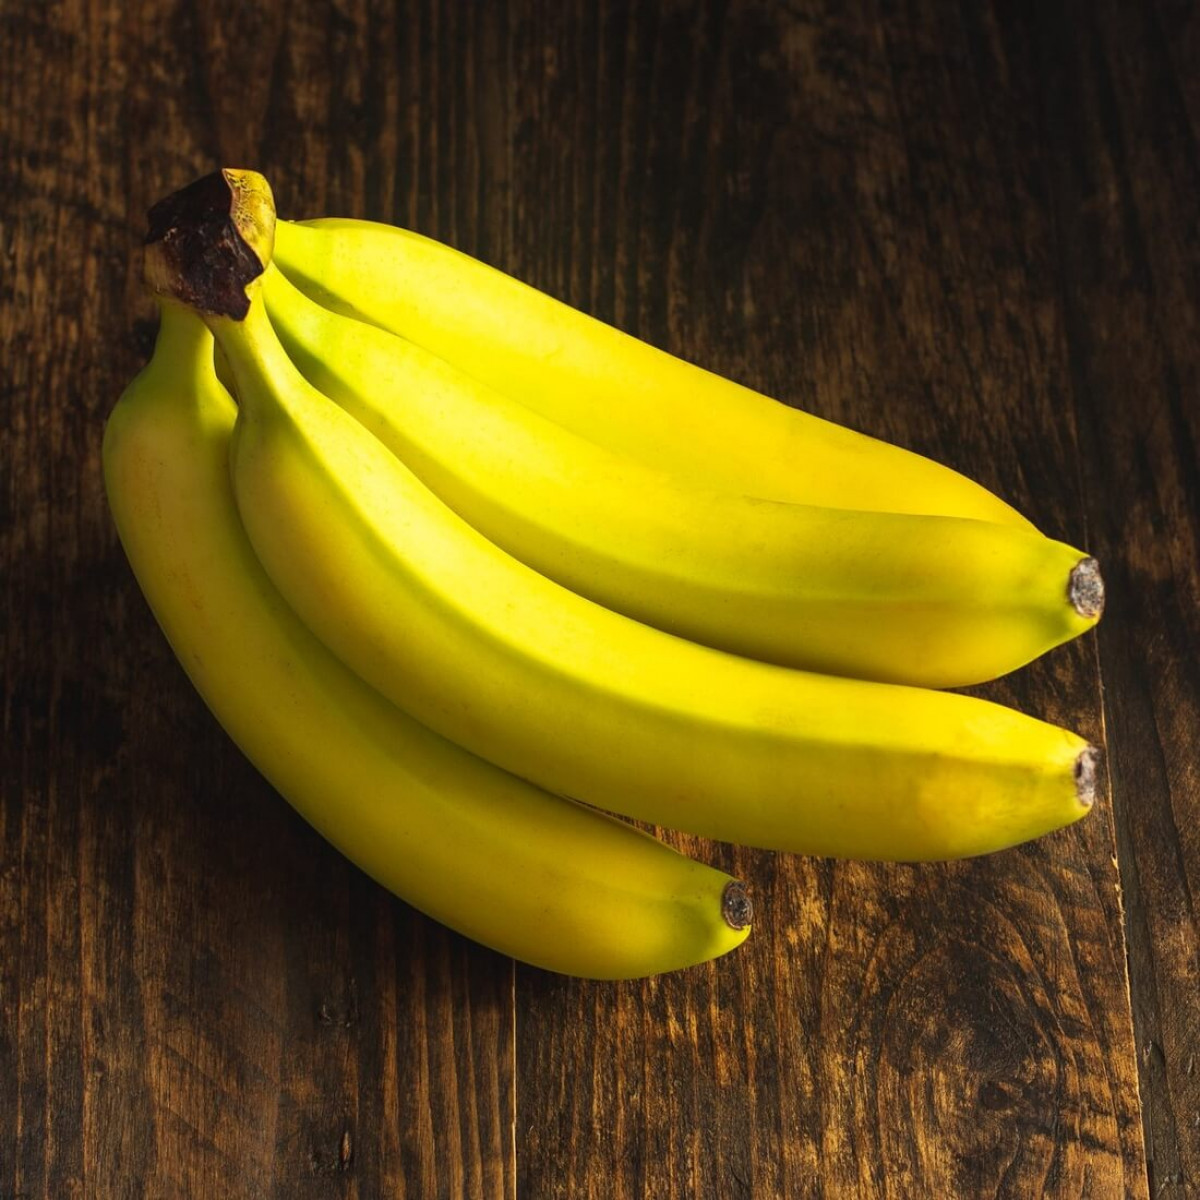 Product picture for Banana